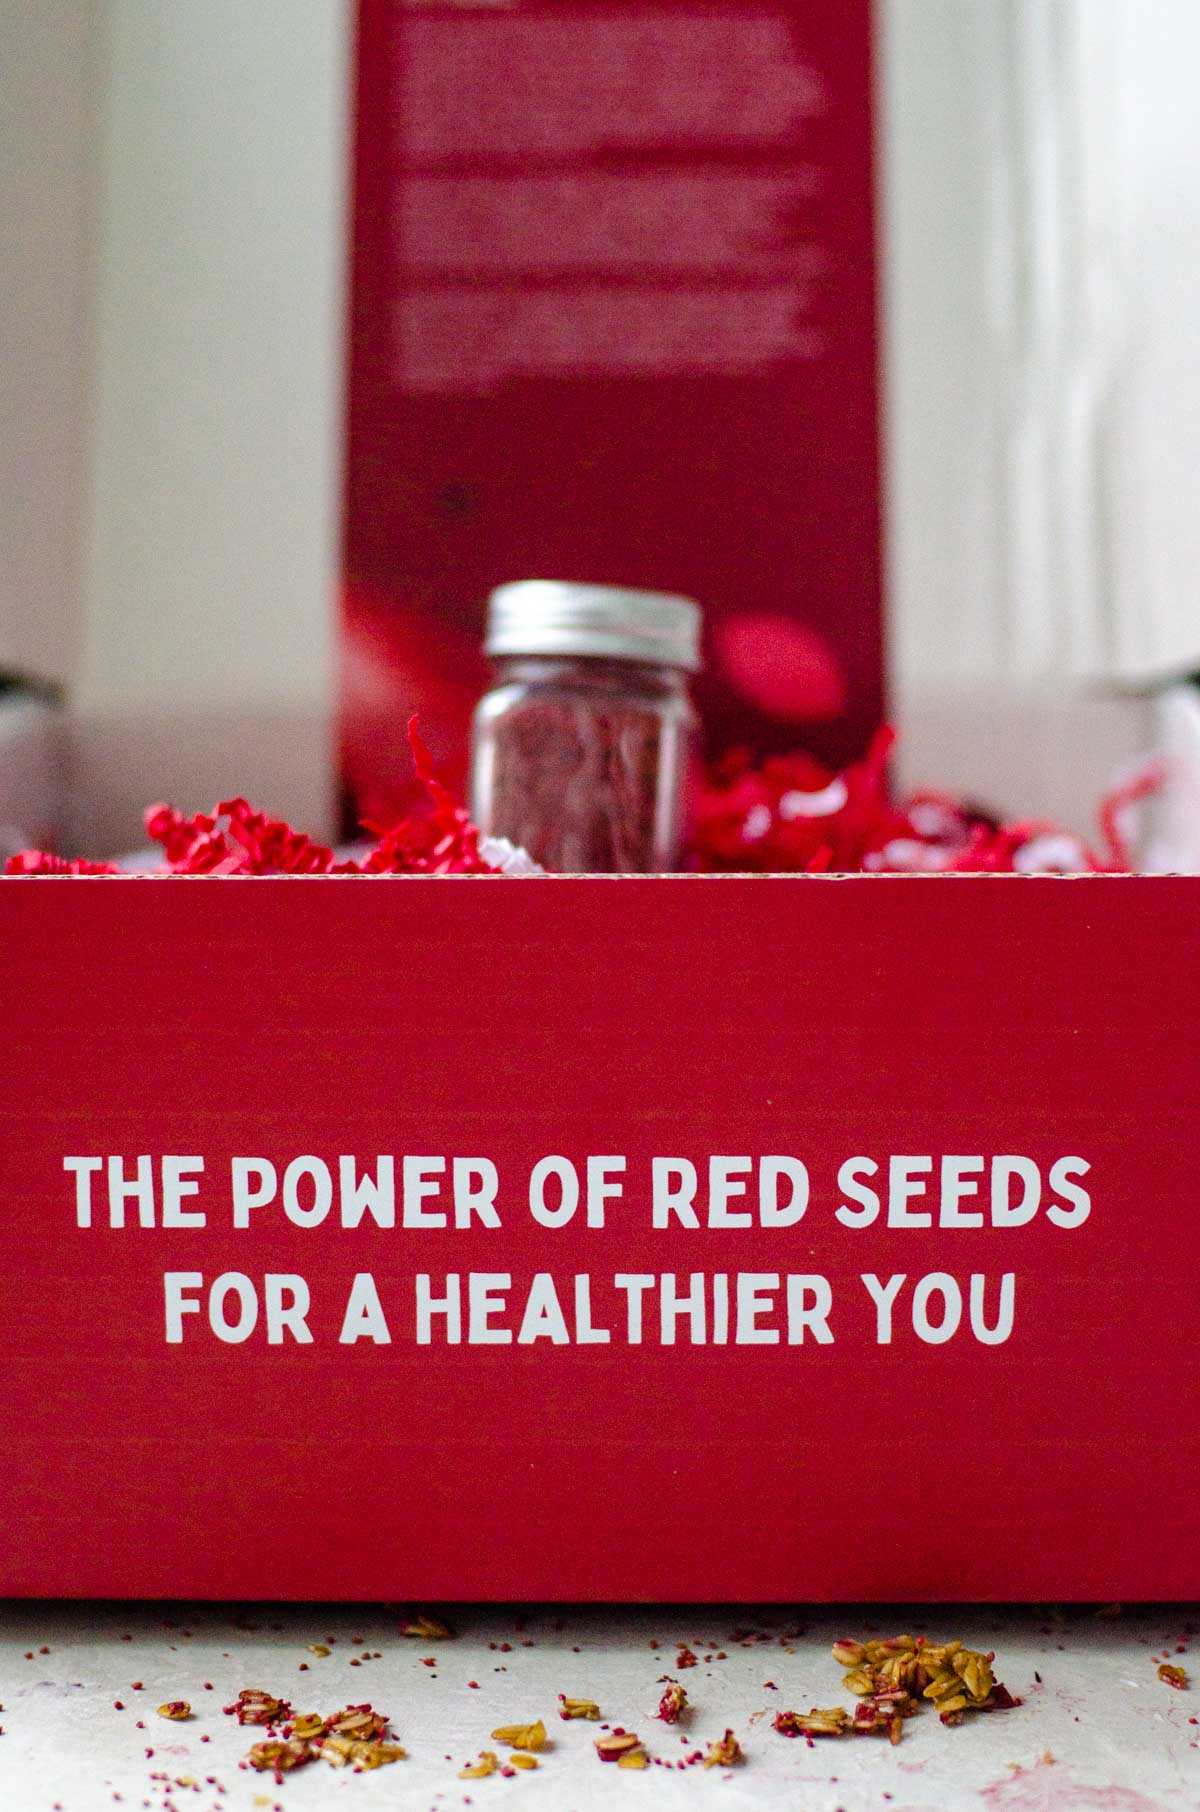 A red box that says "the power of red seeds for a healthier you" with a container of cranberry seeds coming out.